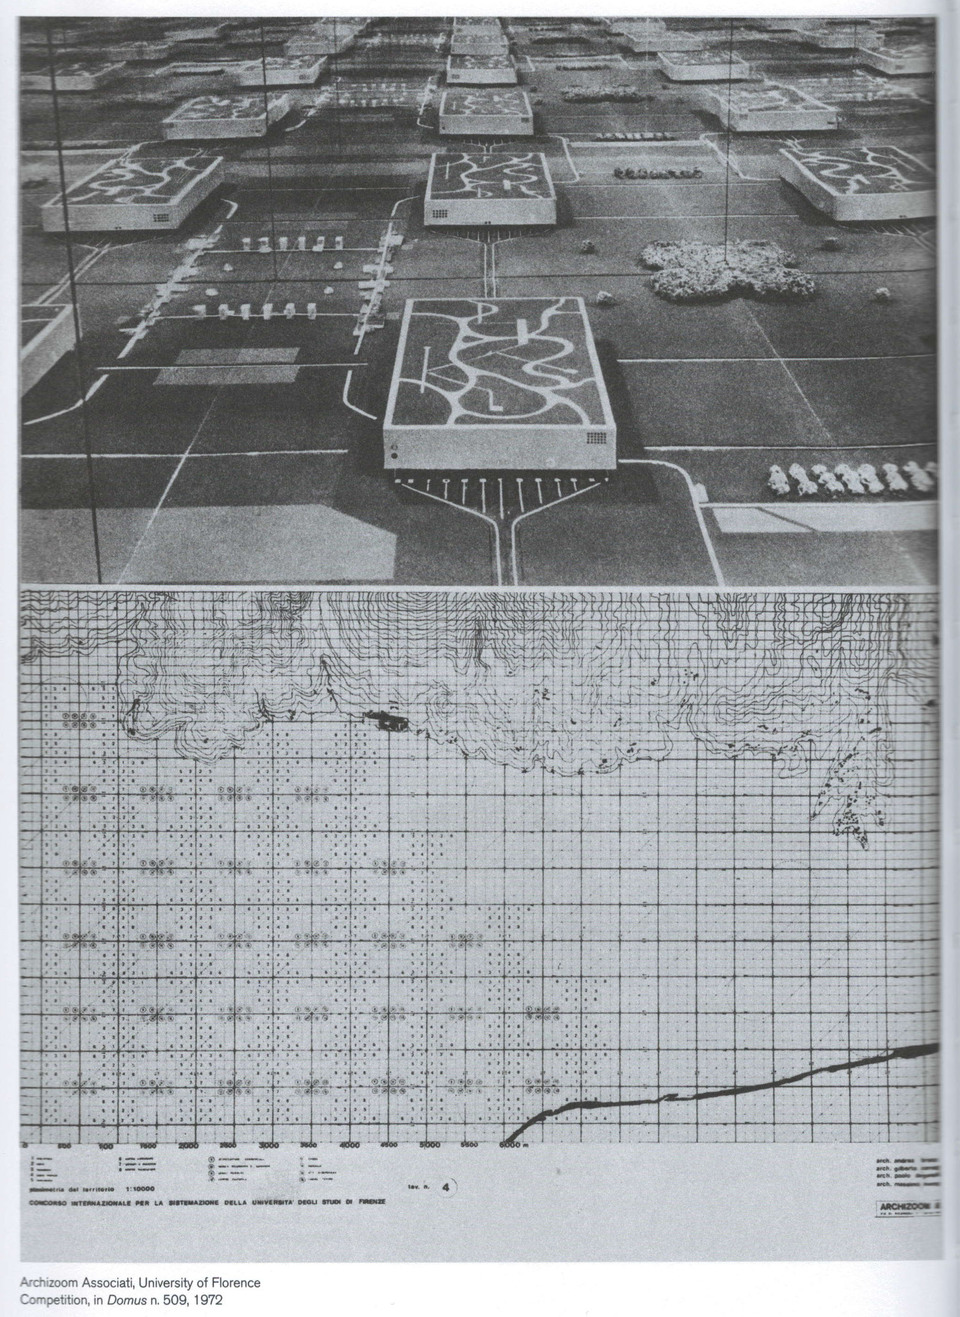 Archizoom Associati, University of Florence Competition, in Domus 509, 1972 – forrás: Elisa C. Cattanado (ed.), Andrea Branzi, E=mc2: The Project in the Age of Creativity, Actar Publishers, 2020, p. 328.